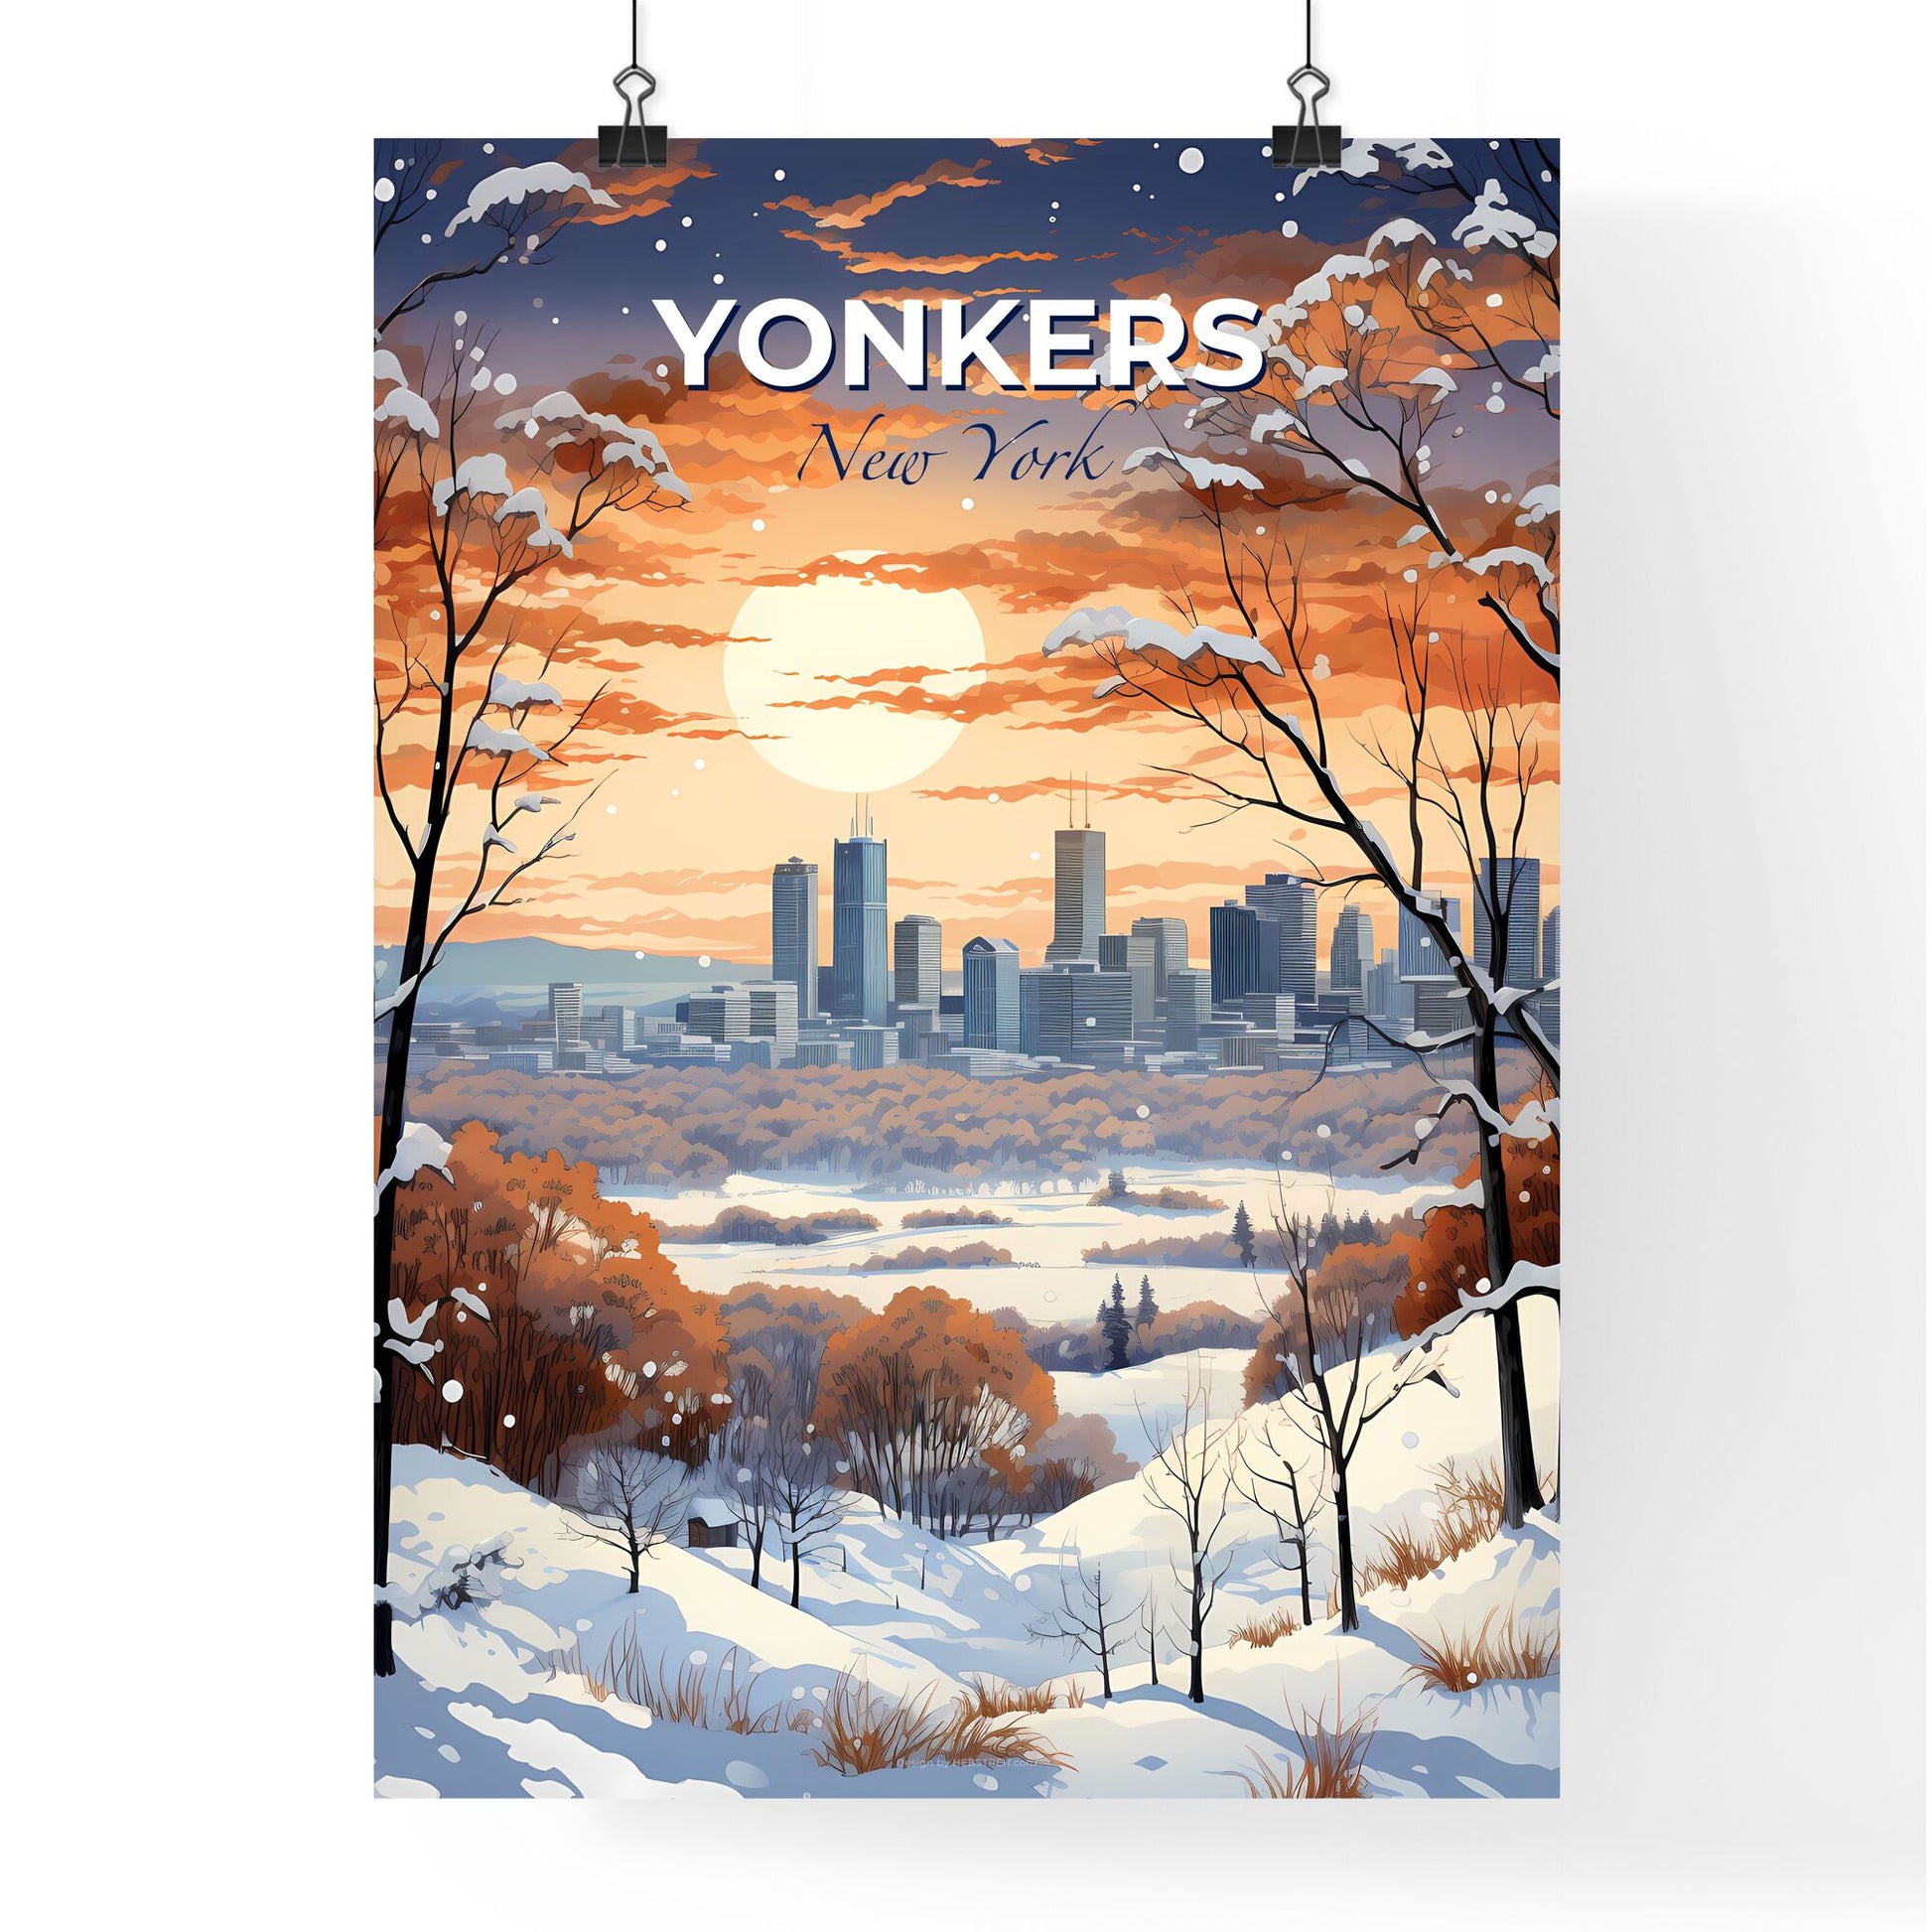 Yonkers, New York, A Poster of a snowy landscape with a city in the distance Default Title